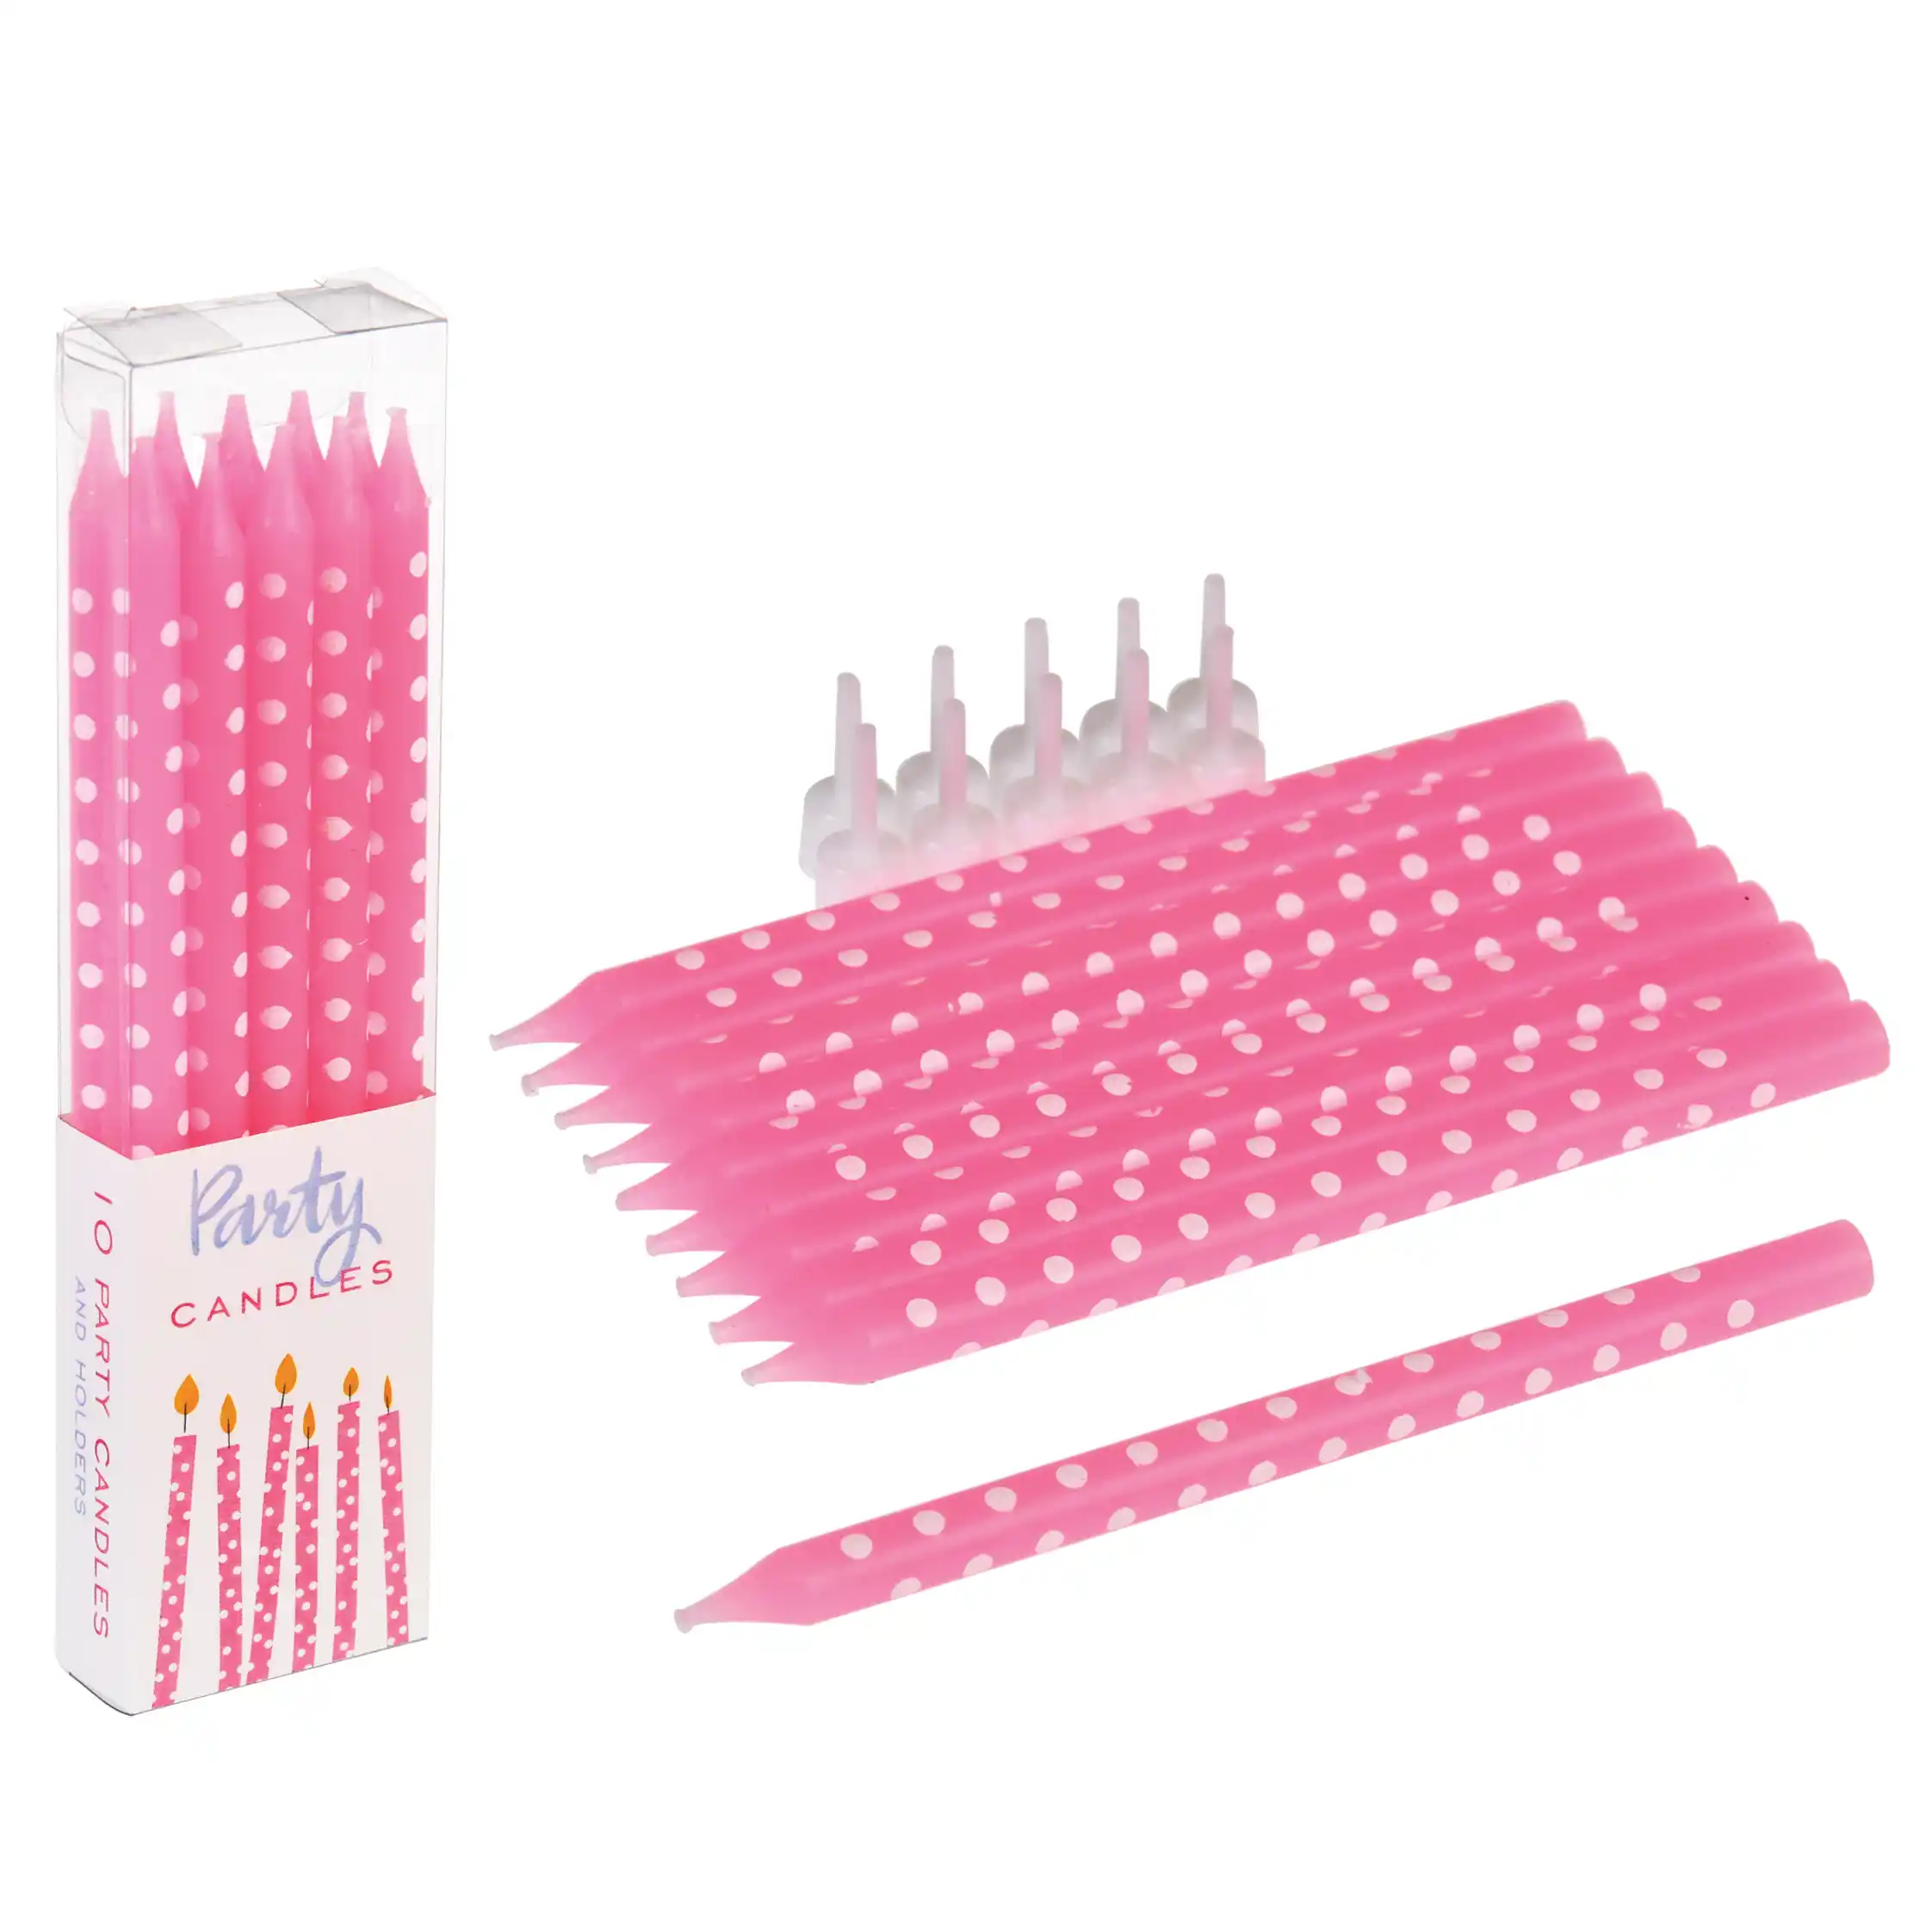 spotty cake candles (pack of 10) - pink